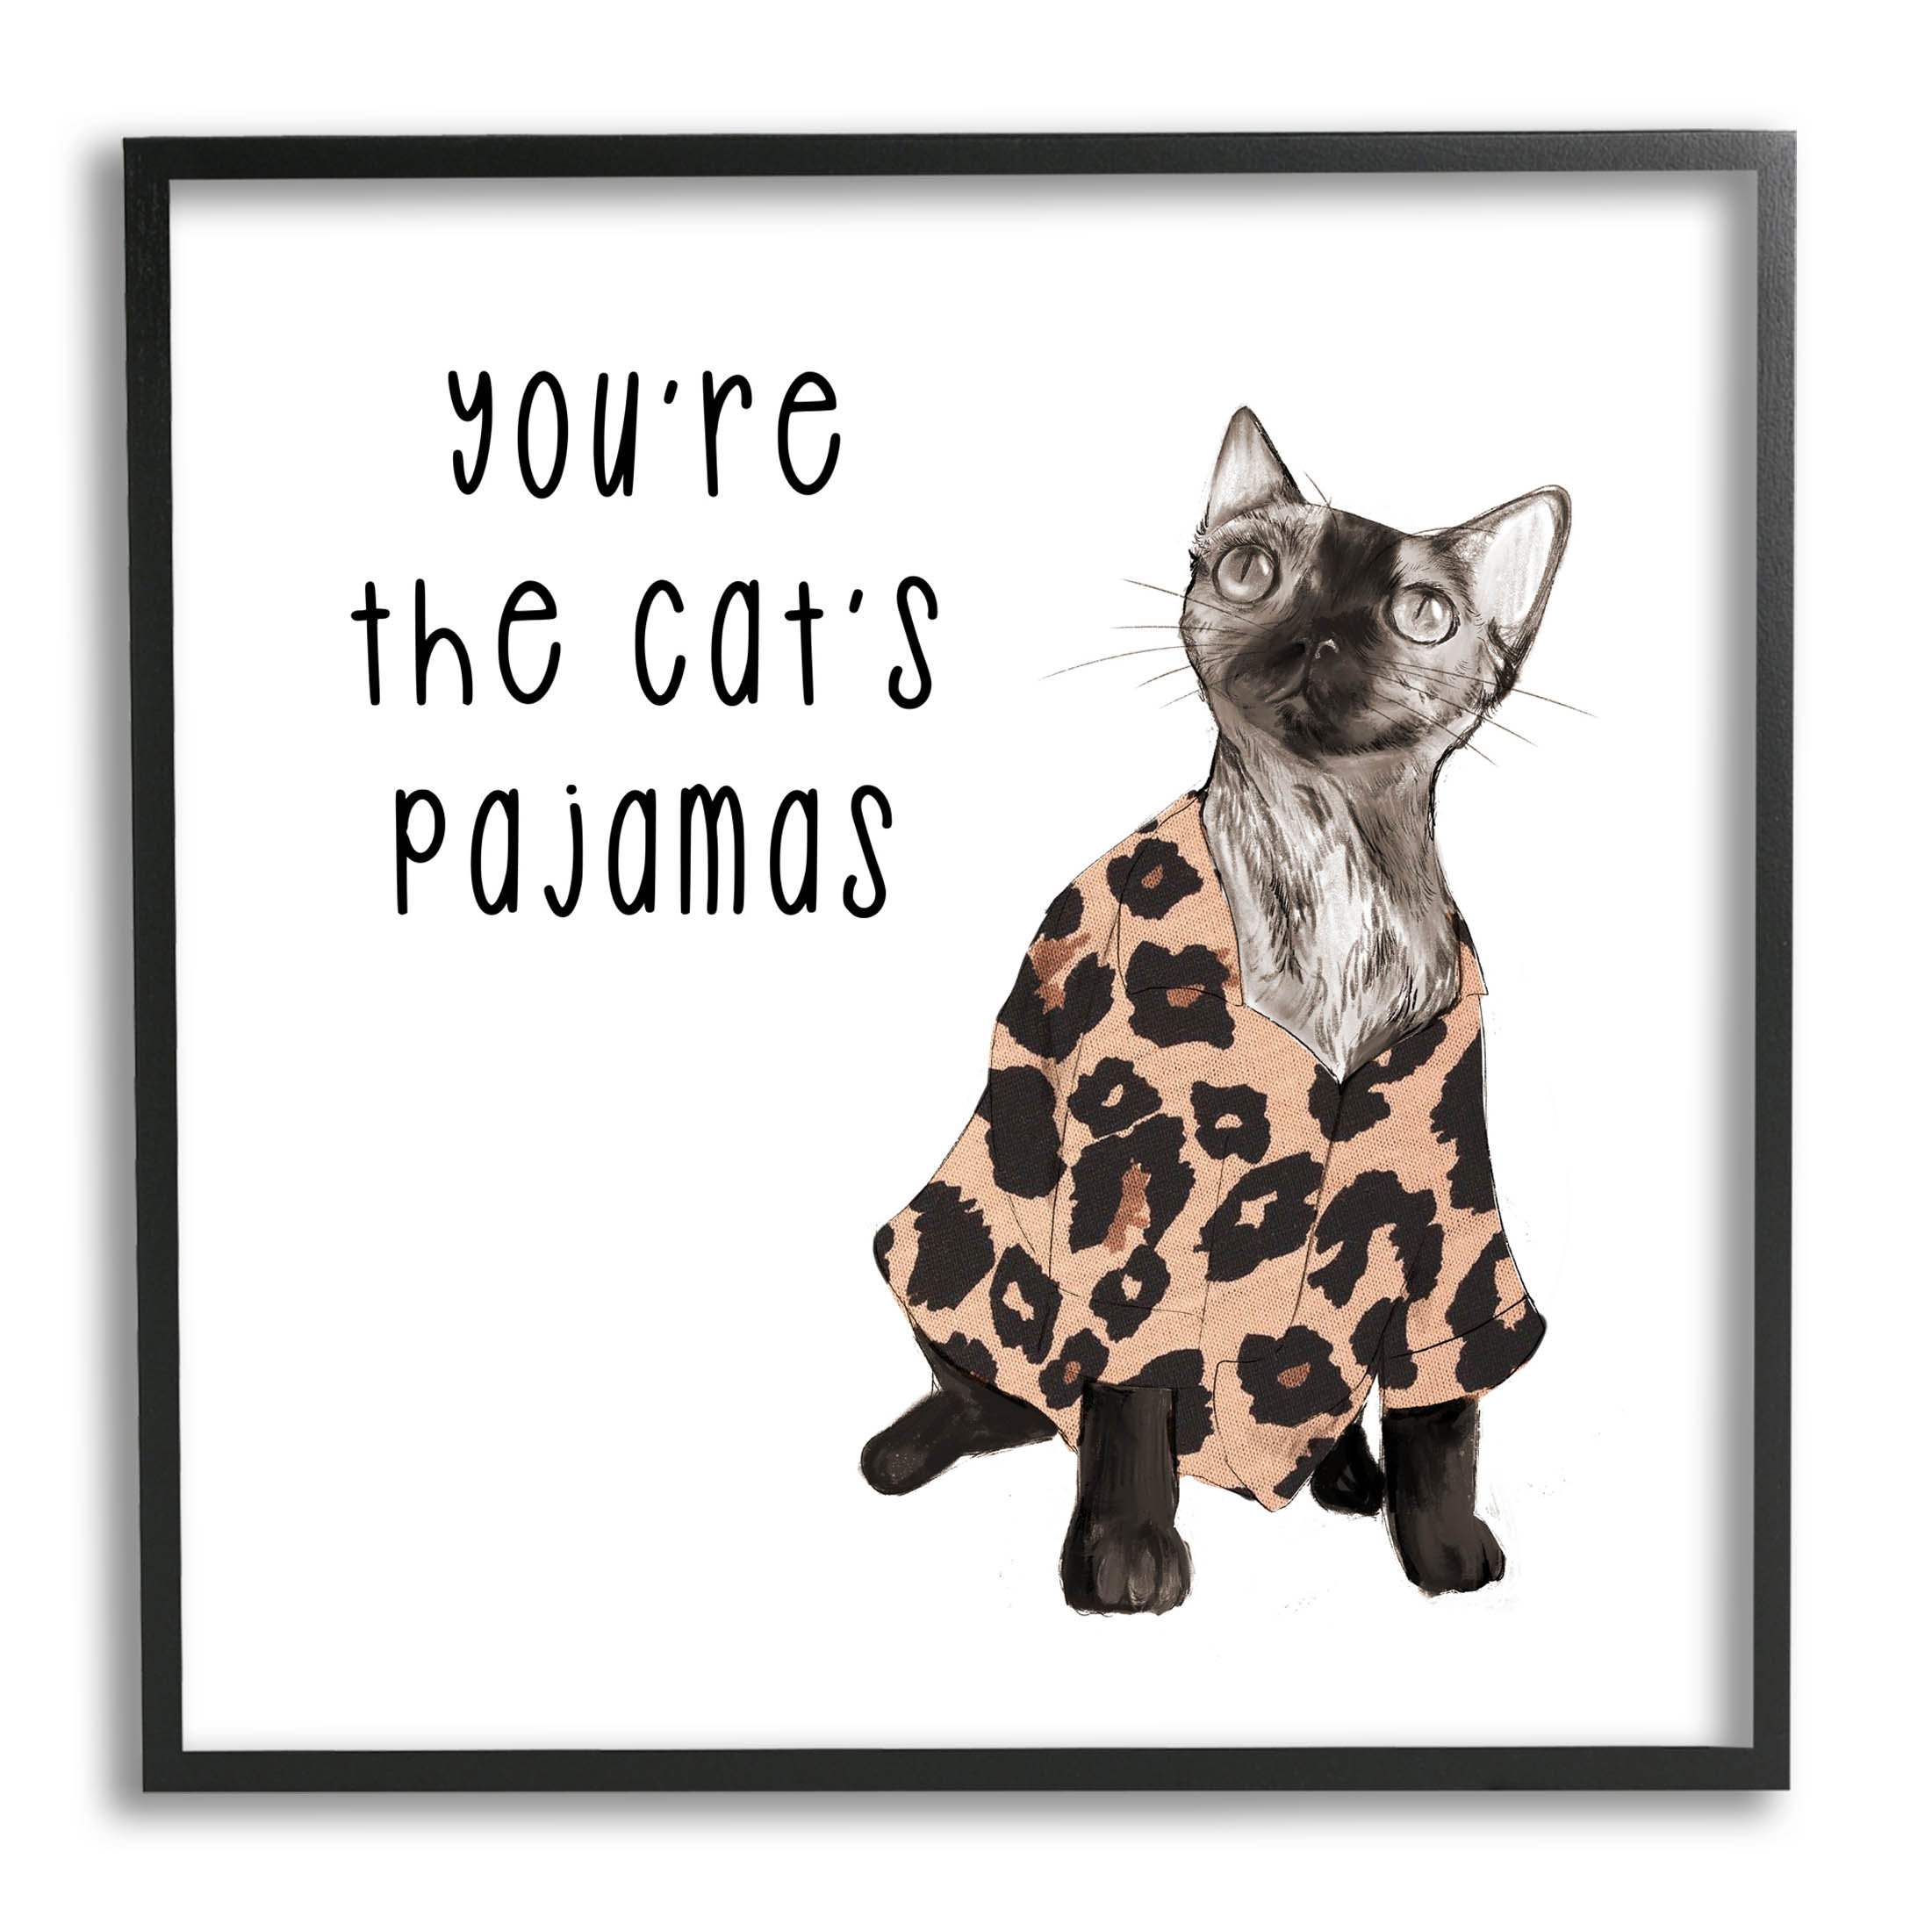 The Cat's Pajamas Phrase Framed On Canvas by Lil' Rue Textual Art